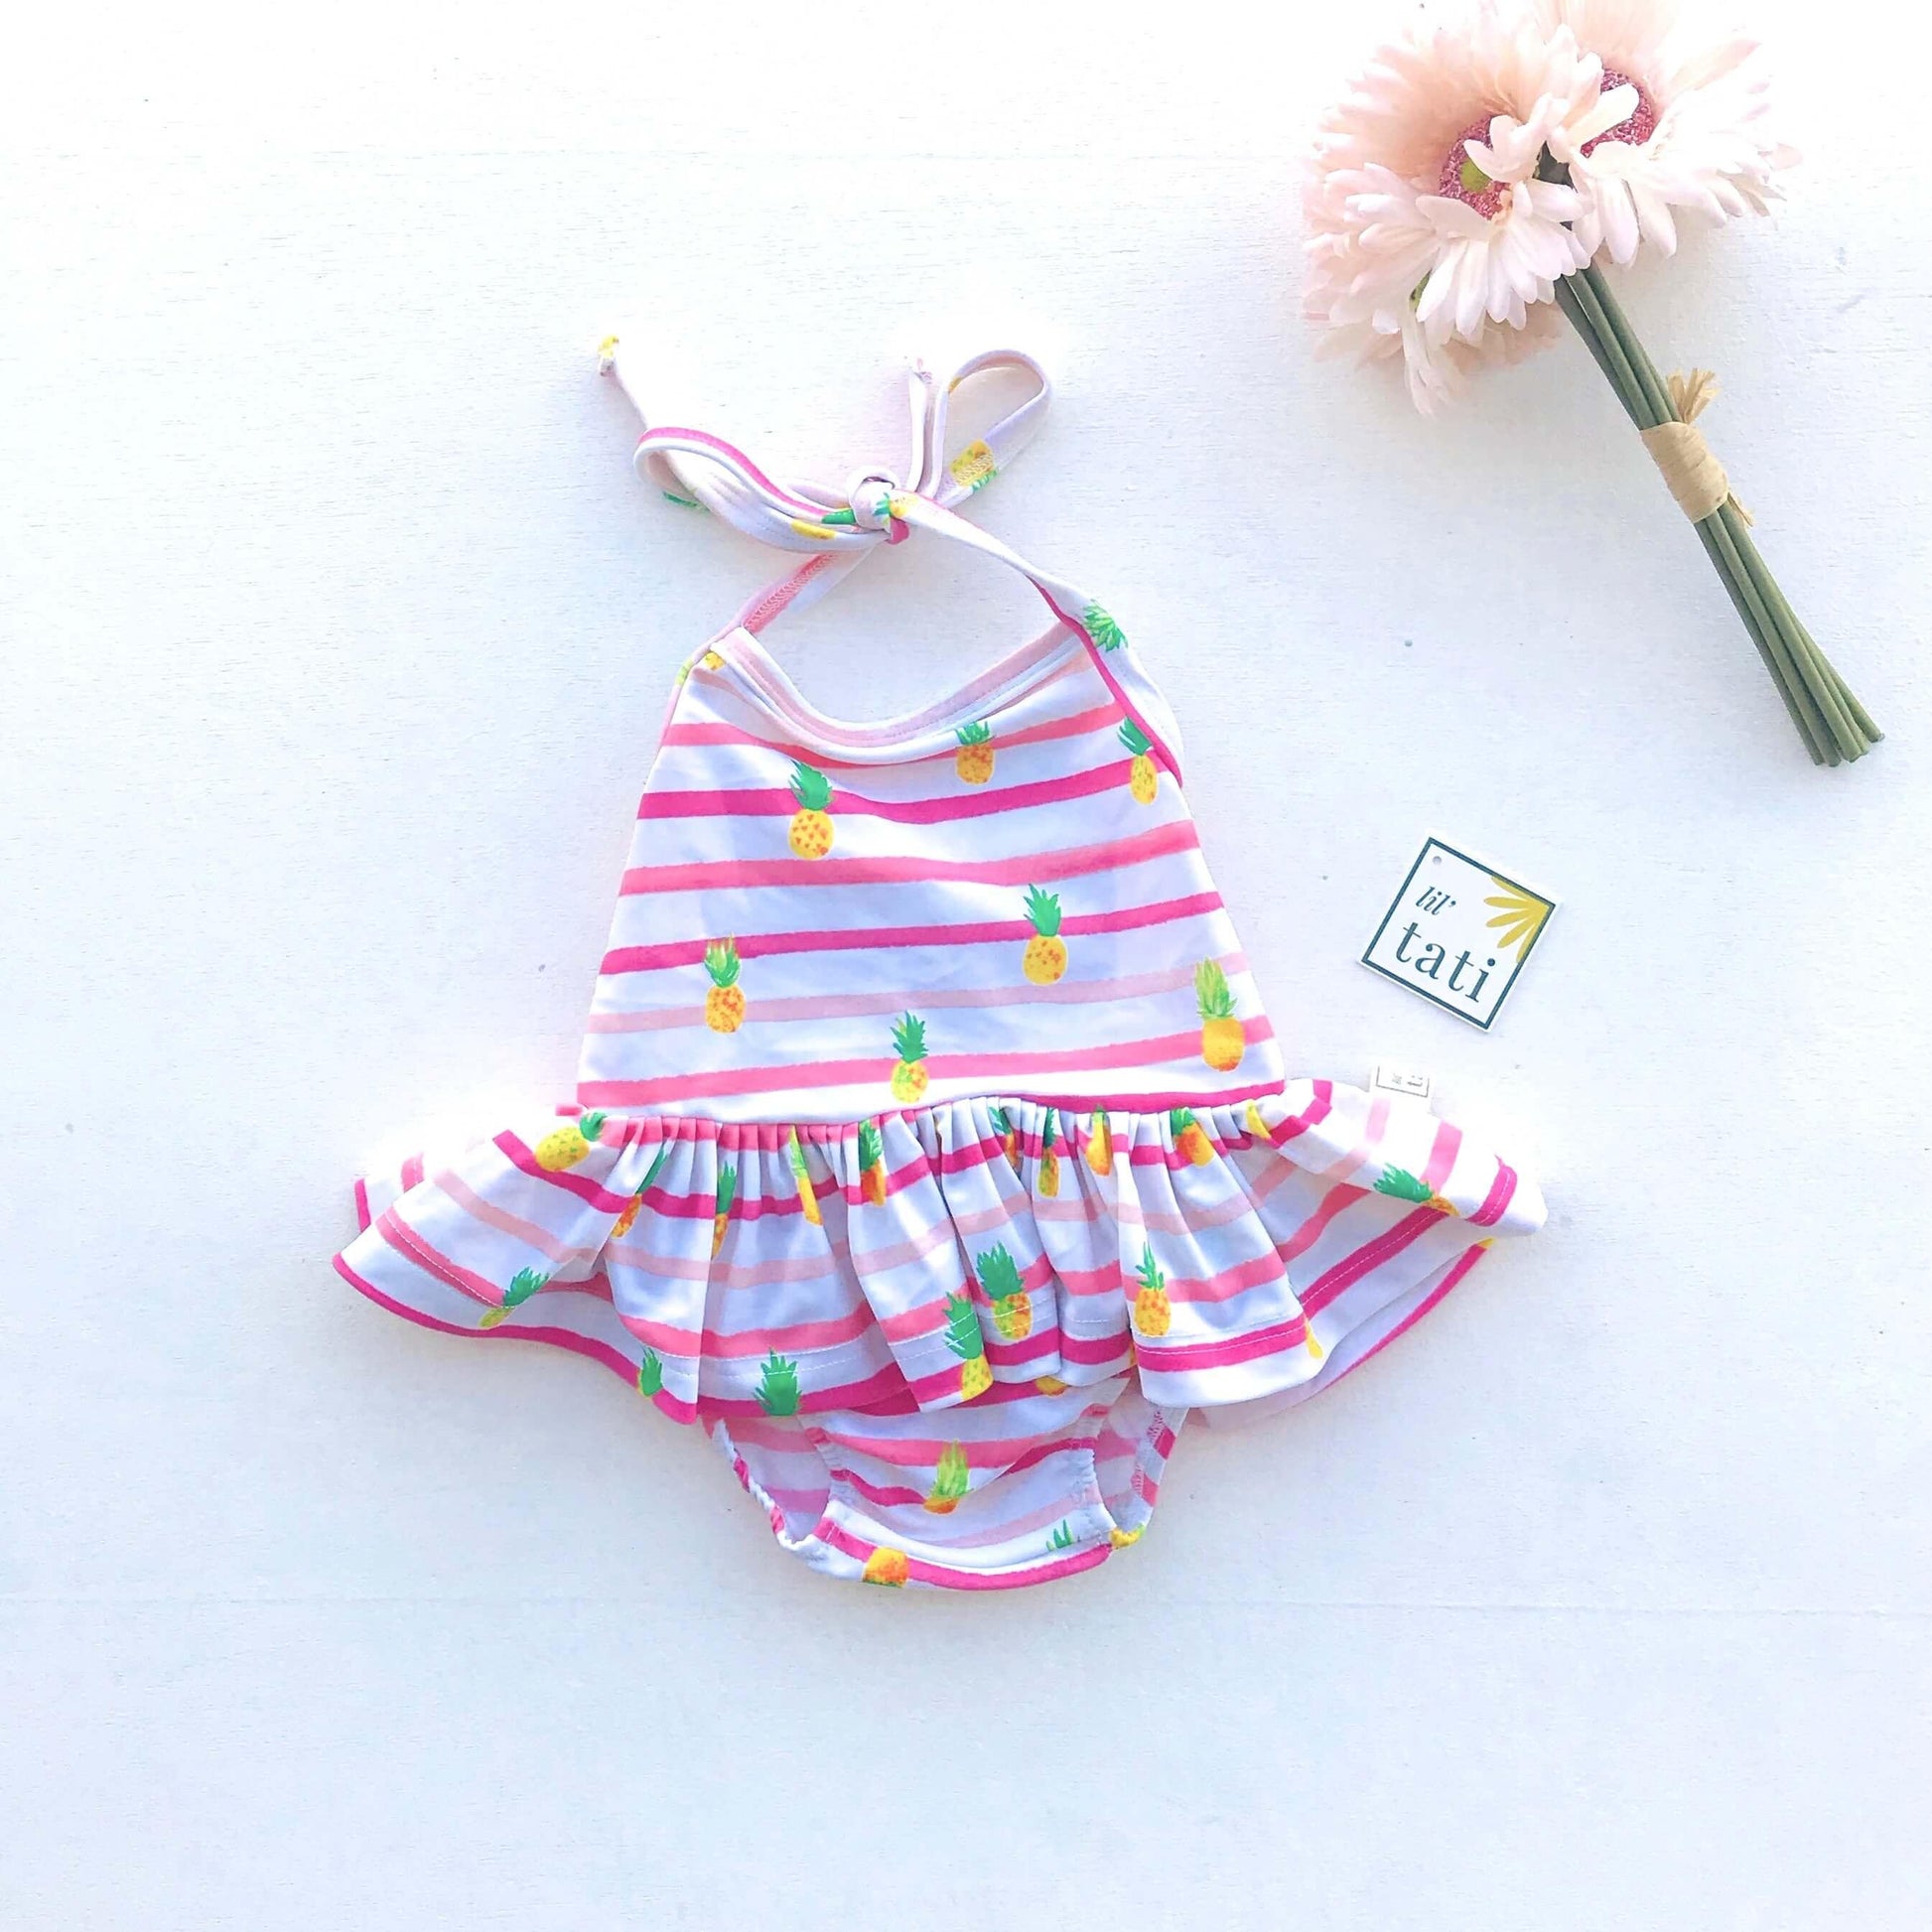 Berry Swimsuit with Tie-Straps in Pineapple Pink Stripes Print - Lil' Tati